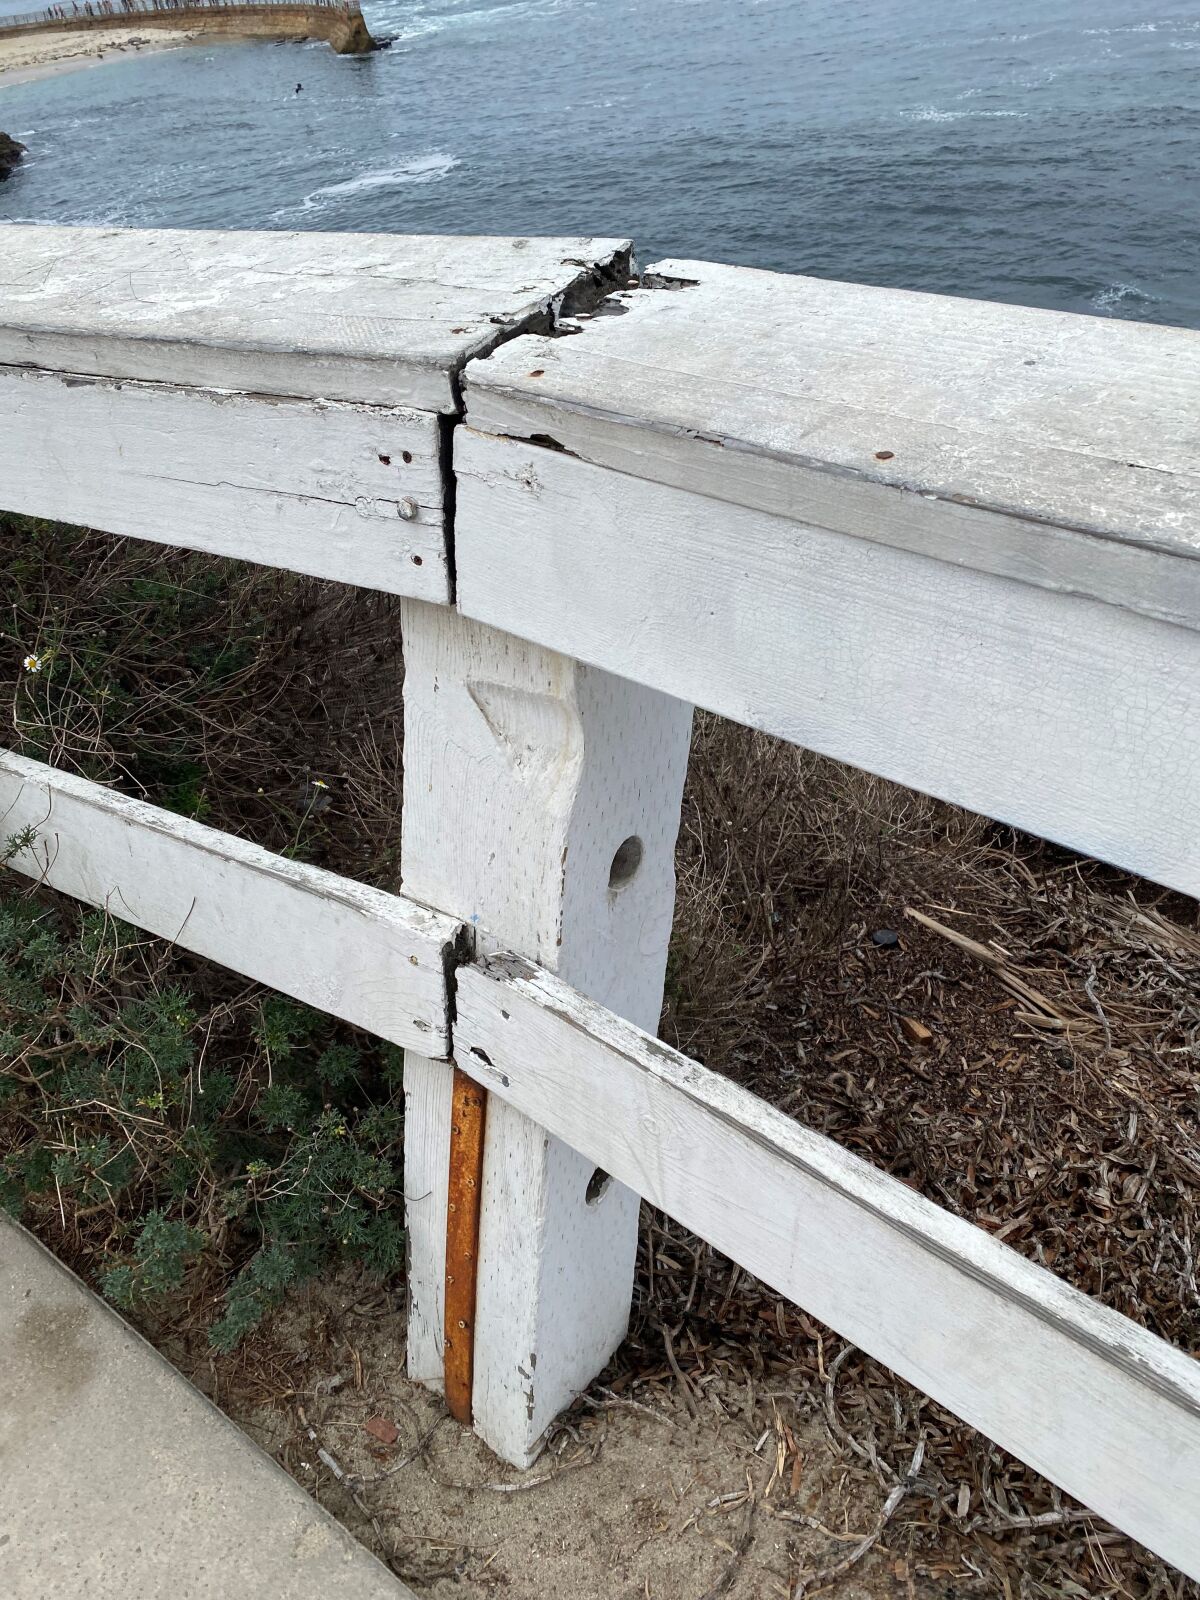 Some residents say the fences along Scripps Park in La Jolla are losing their stability and could pose a safety hazard.